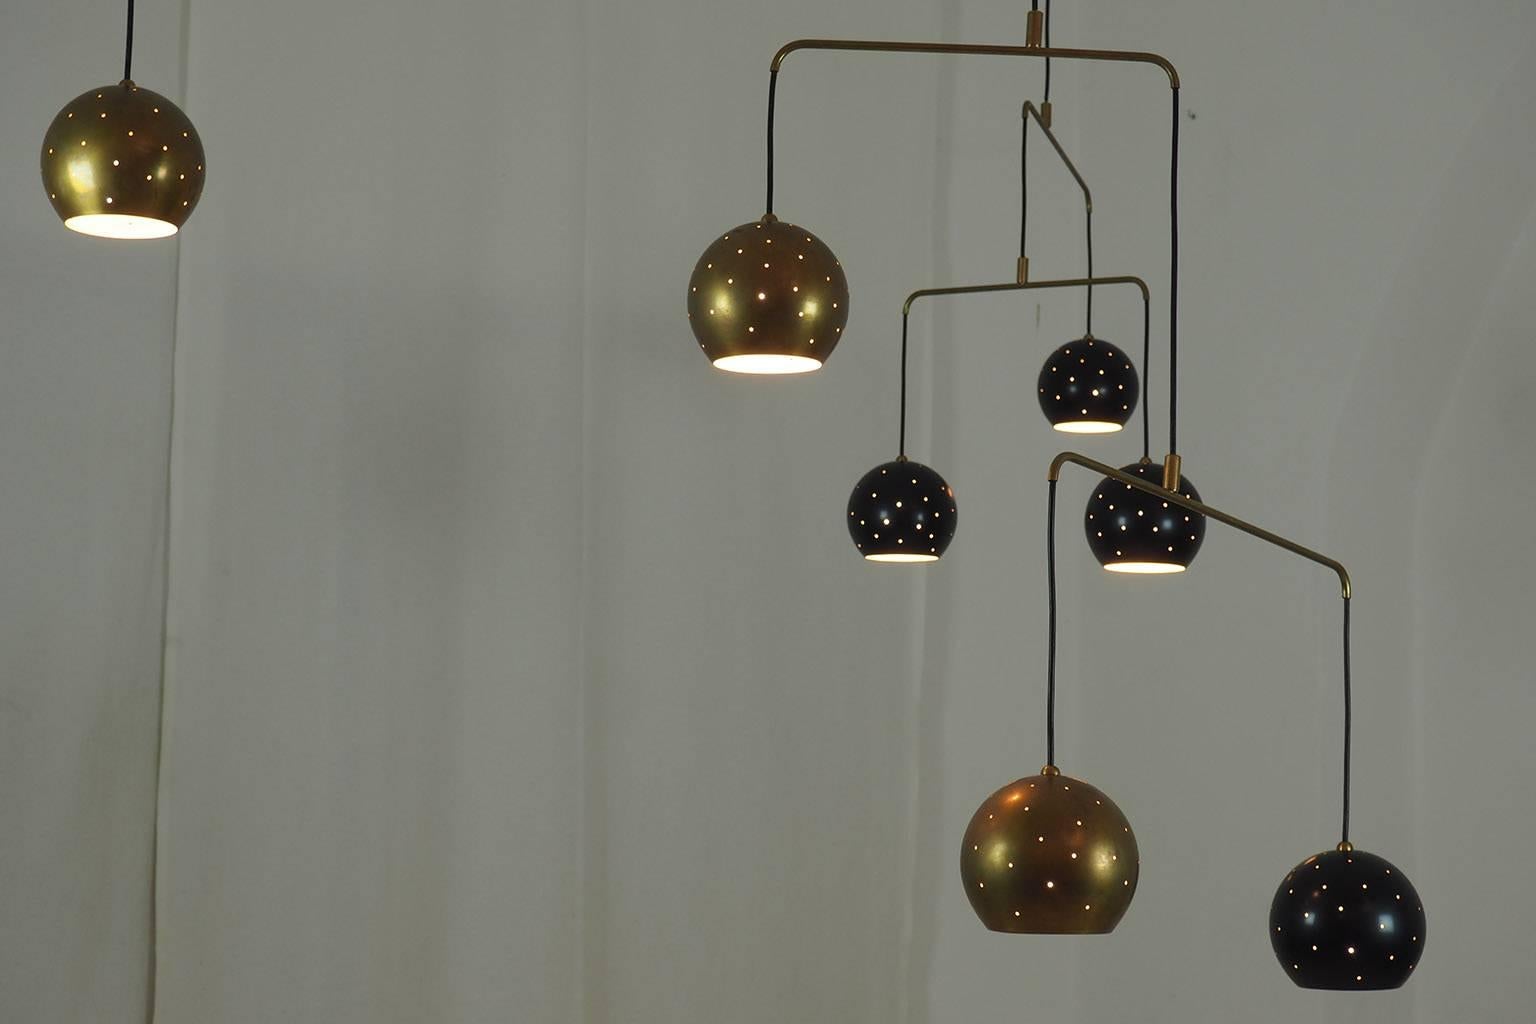 Original vintage Italian brass Mobile chandelier.
Large, magic and poetical Mobile chandelier with brass and black suspending spheres; it can move with the flow of air.
Wholly in balance through its thin brass arms and the interaction of the